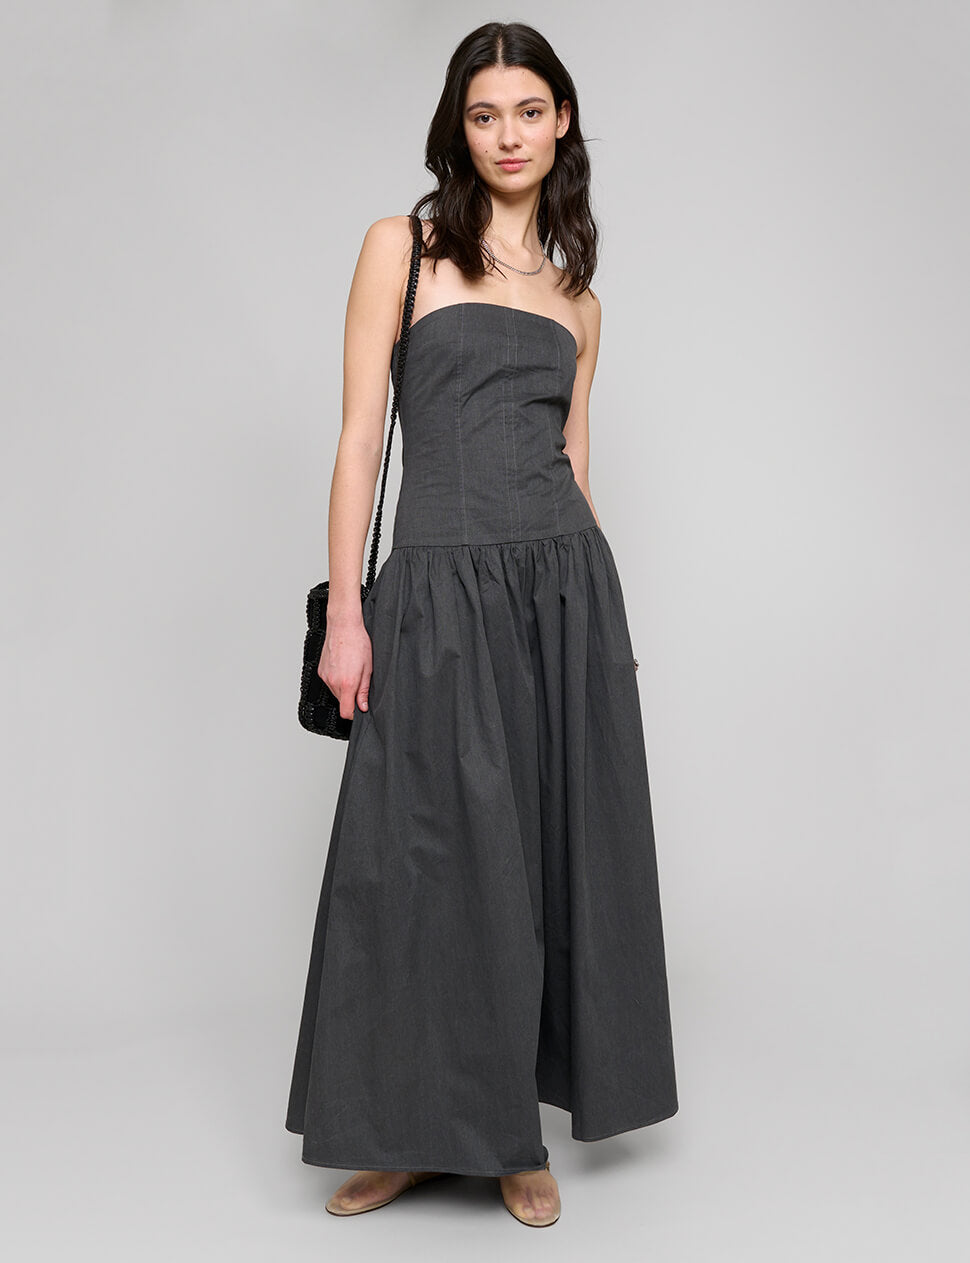 Charcoal Strapless Dress